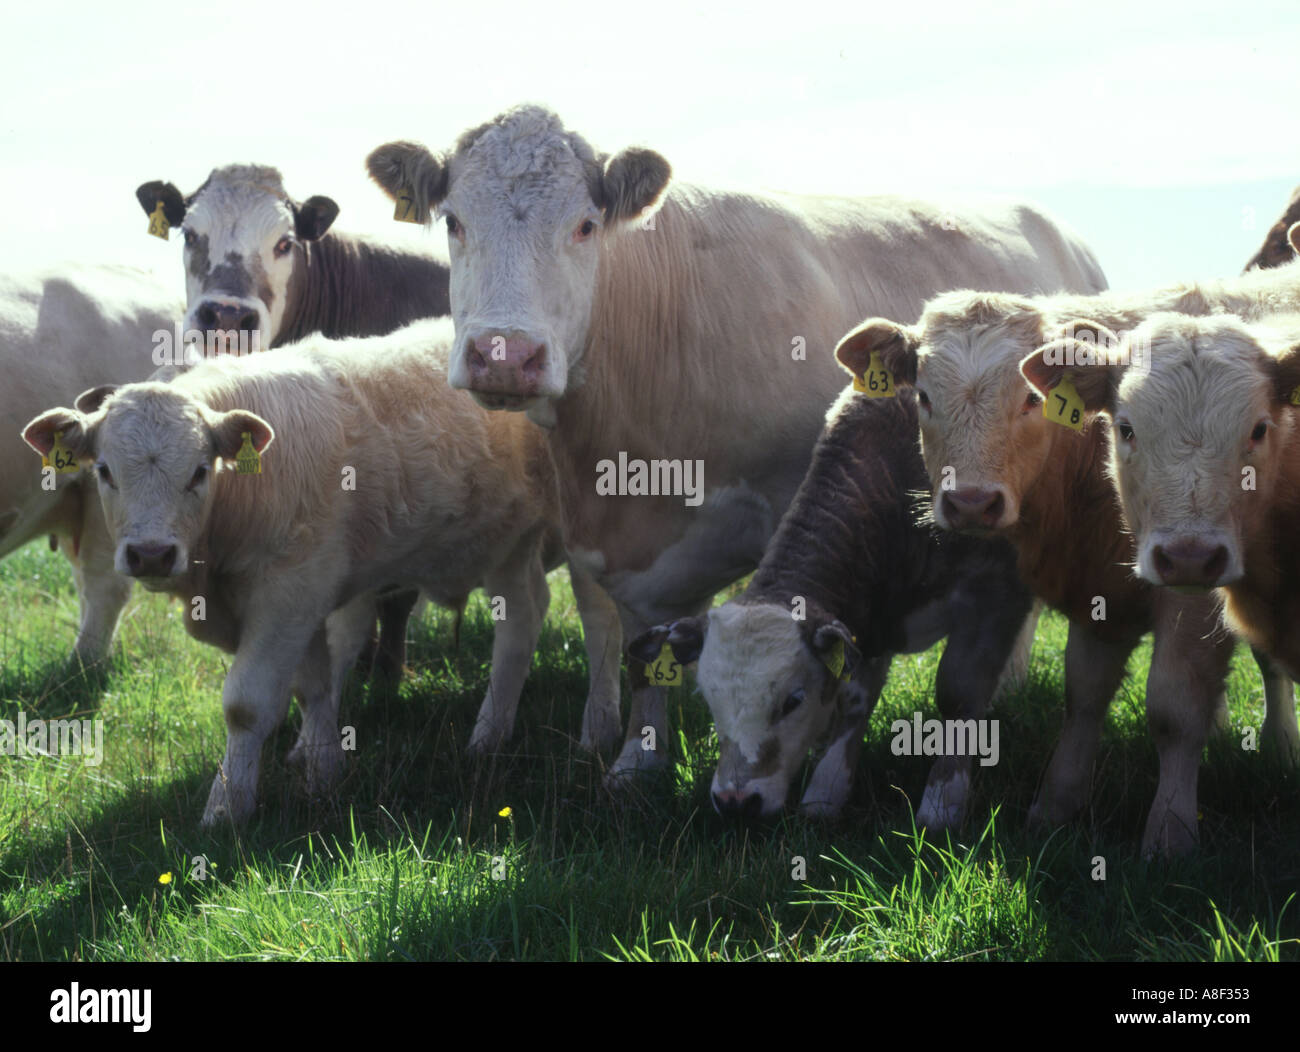 dh Cattle ANIMALS UK UK Beef cows Orkney livestock herd crowd together gb farm cow british Stock Photo